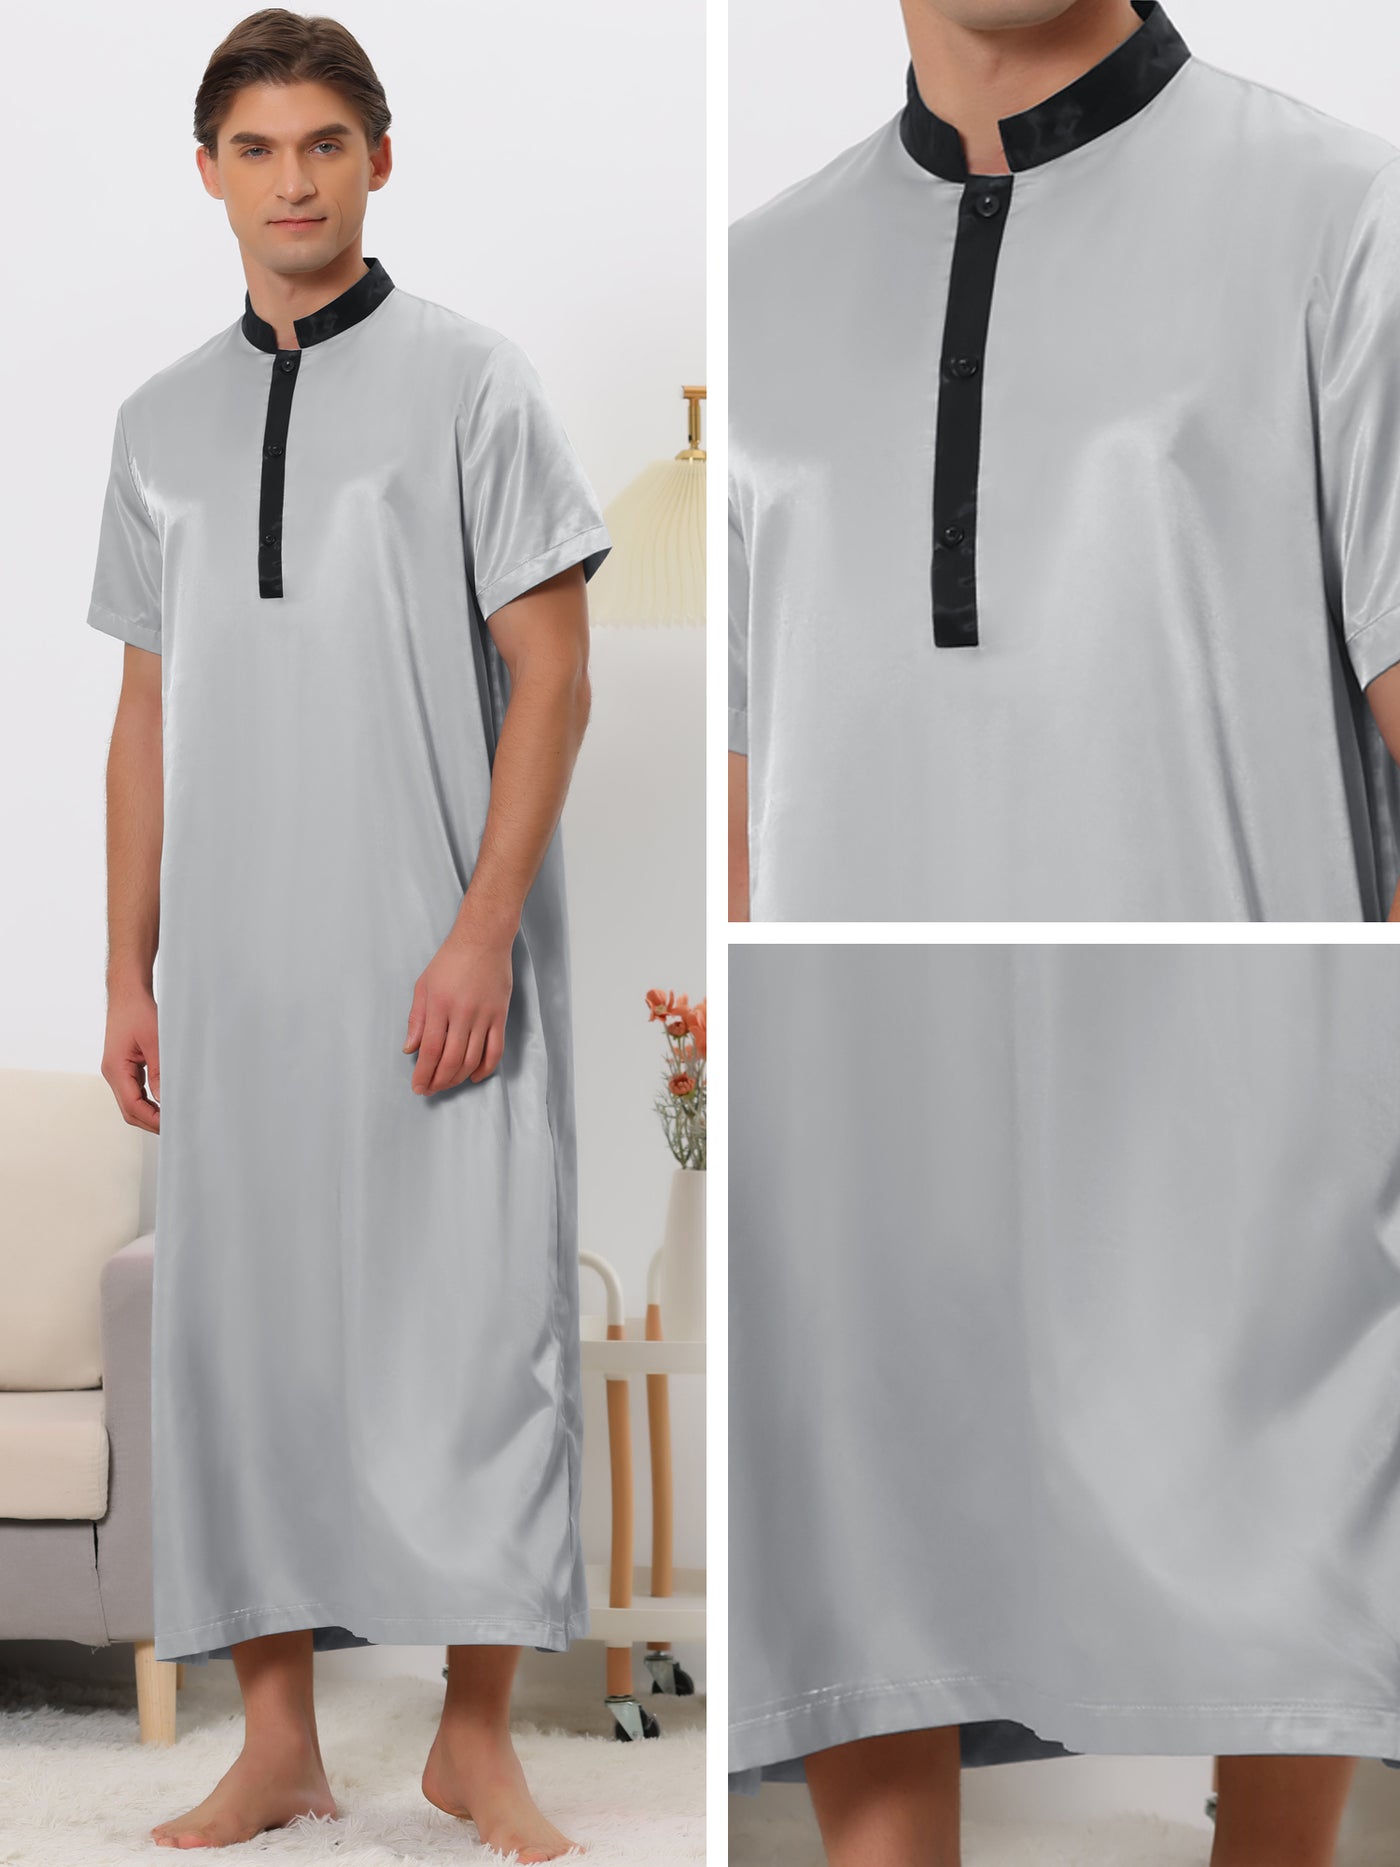 Bublédon Band Collar Nightshirt Short Sleeves Contrast Color Sleepwear Gown